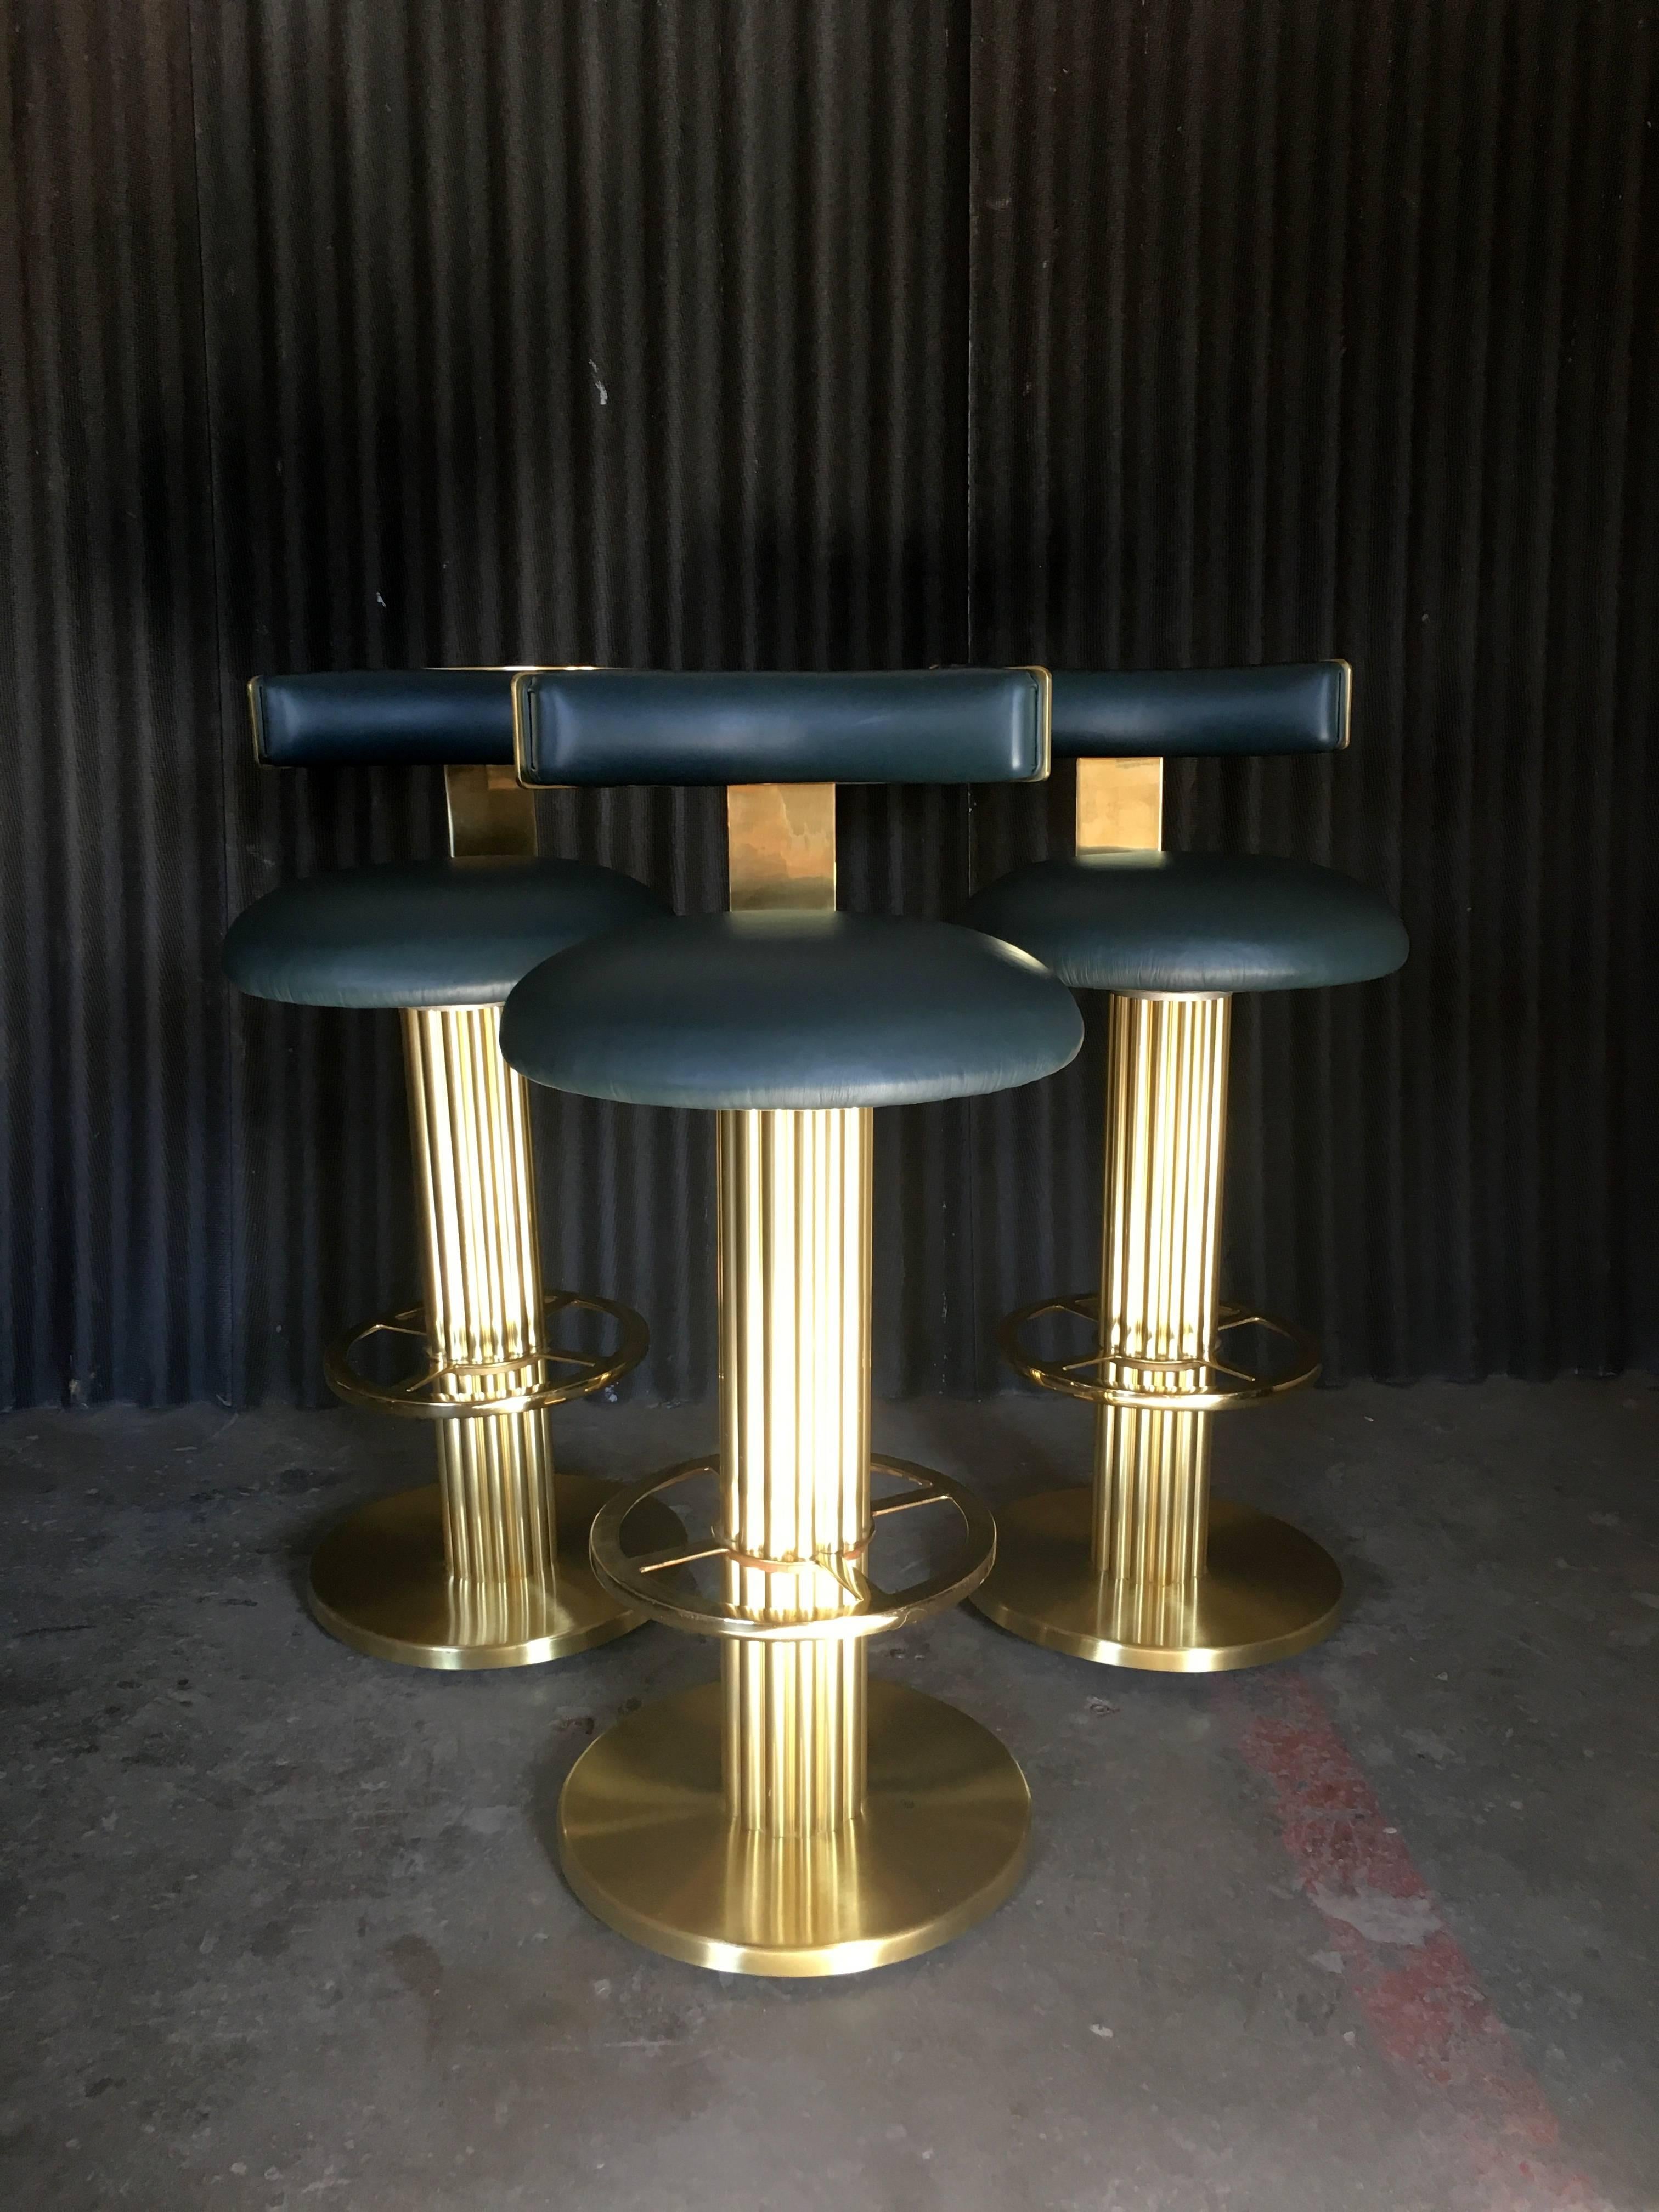 Exquisite Set of three Brass Bar Stools by Design for Leisure 1